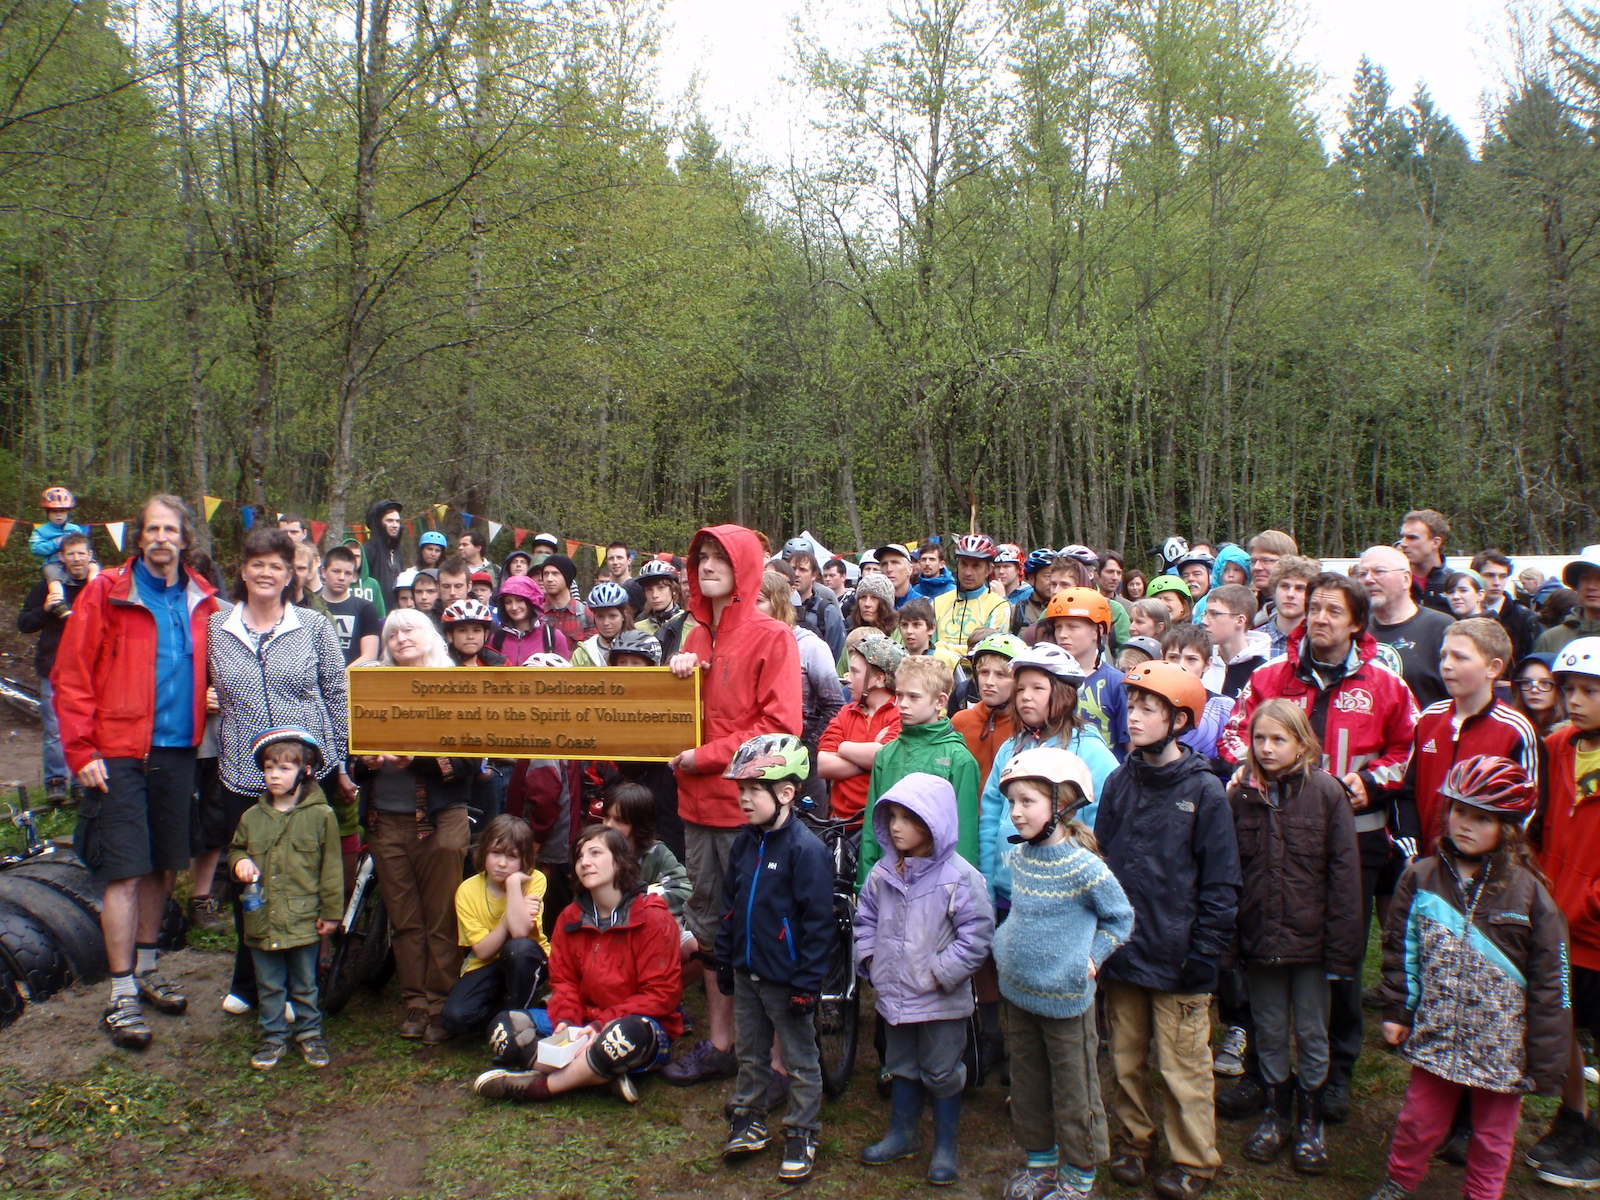 Last spring the Sunshine Coast Regional District officially dedicated the Sprockids Mountain Bike Park to all the volunteers who donated their time and resources to make the park a reality. Three generations of mountain bikers attended the event.